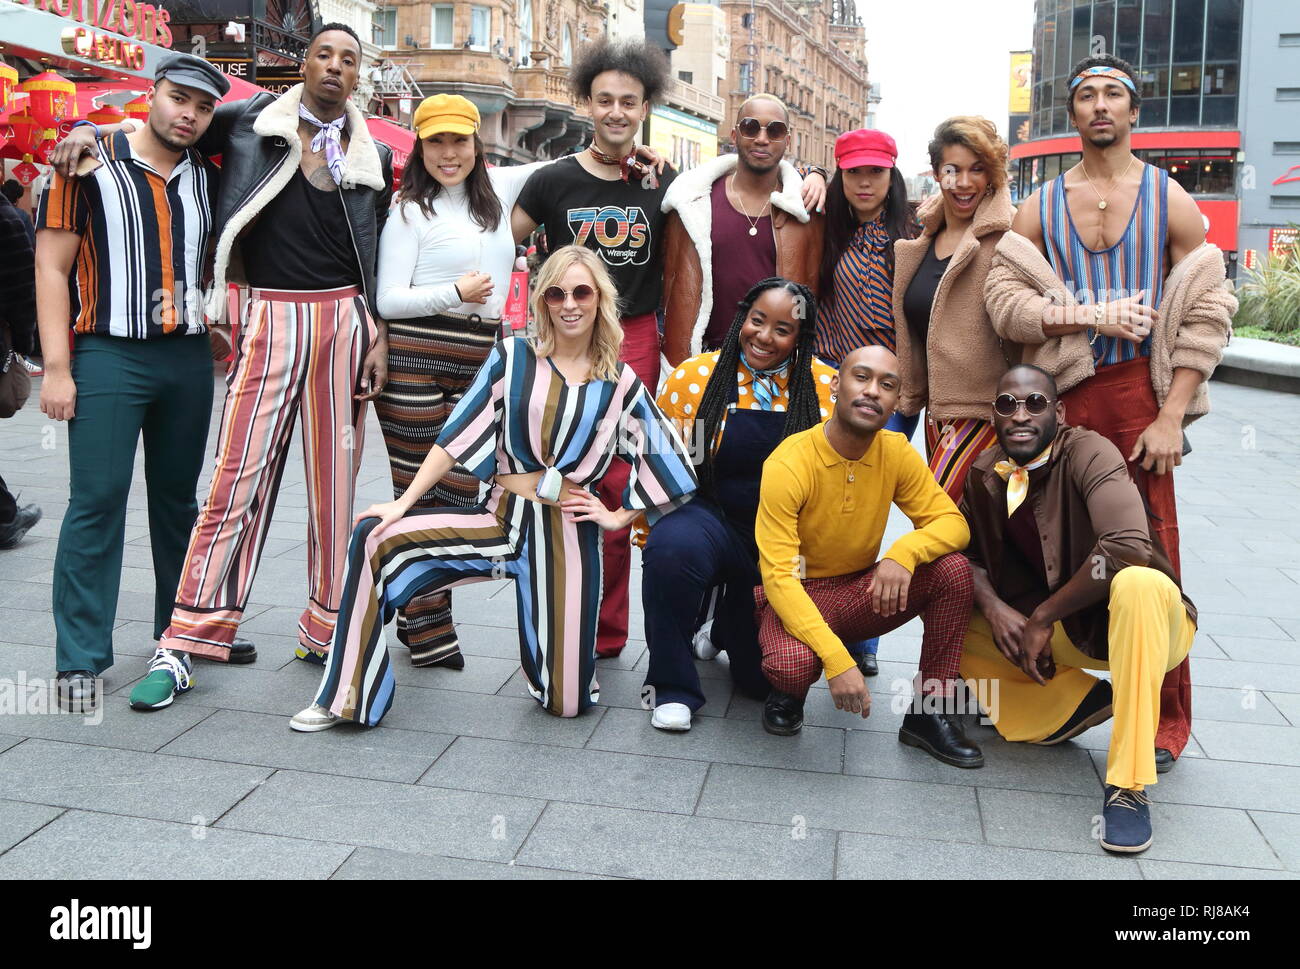 The American Soul crew seen posing together for a photo. In honour of the BET (Black Entertainment Television) Network’s groovy new period drama, American Soul, a flash mob dance take-over on the streets of London. Stock Photo